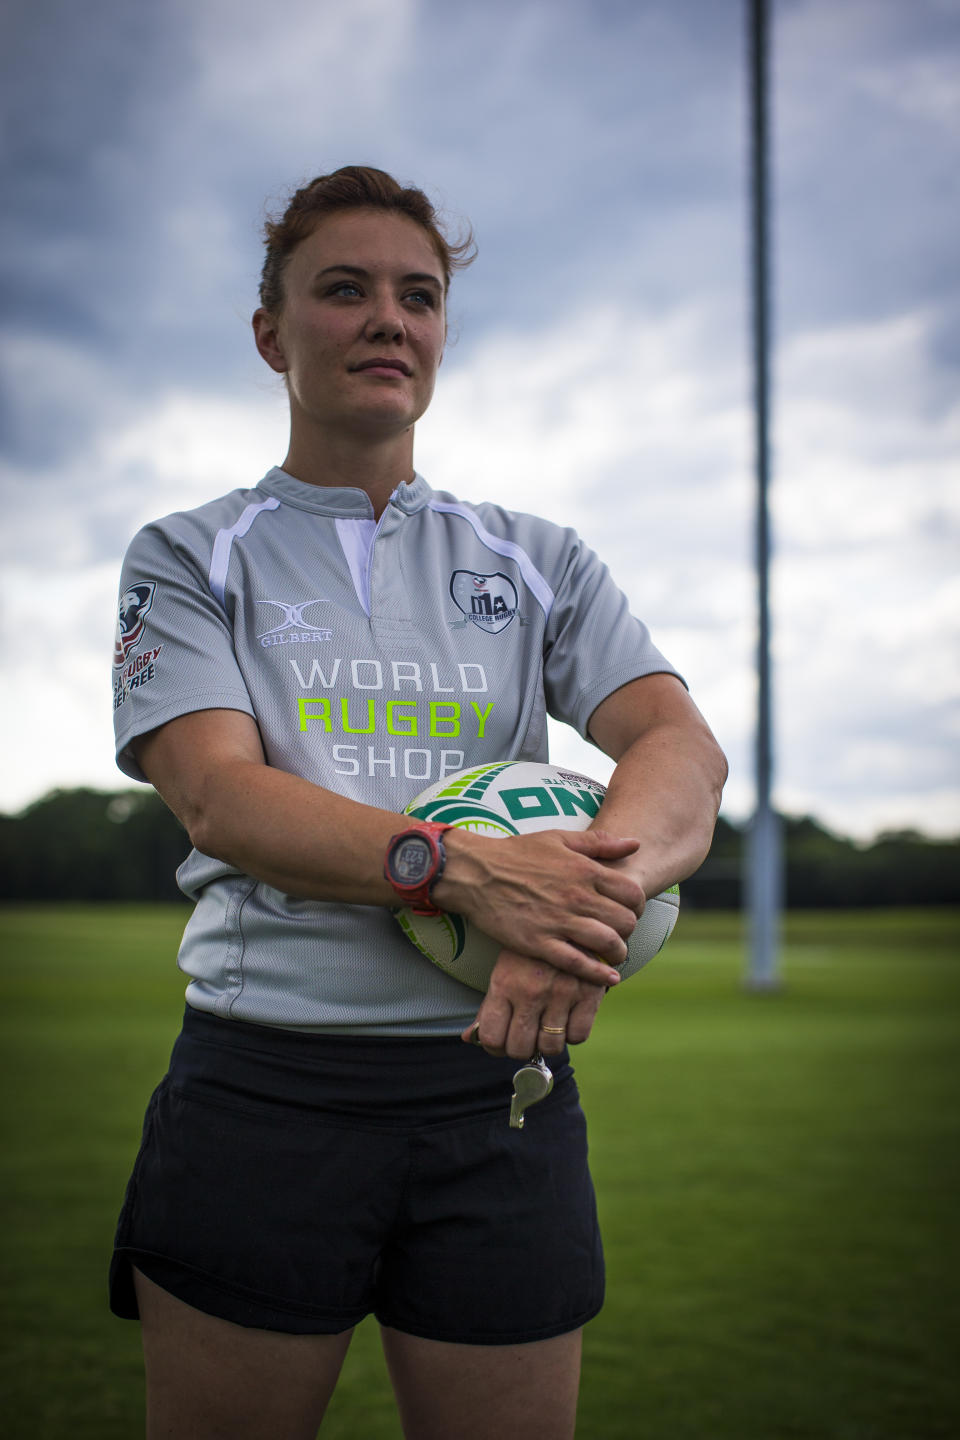 Rugby referee Gray Montrose poses for a photo at Dorey Park and Recreation Center in Henrico, Va., July 21, 2023. Montrose has been involved in the sport of rugby since she was a young teenager either as a competitor or referee. In 2021 Montrose filed a complaint with SafeSport that she was groped by another referee while driving him to a college tournament in Virginia. The referee was given six-months probation, but after Montrose expressed concern about his return to the sport, the center turned around and opened a case against her. (AP Photo/John C. Clark)